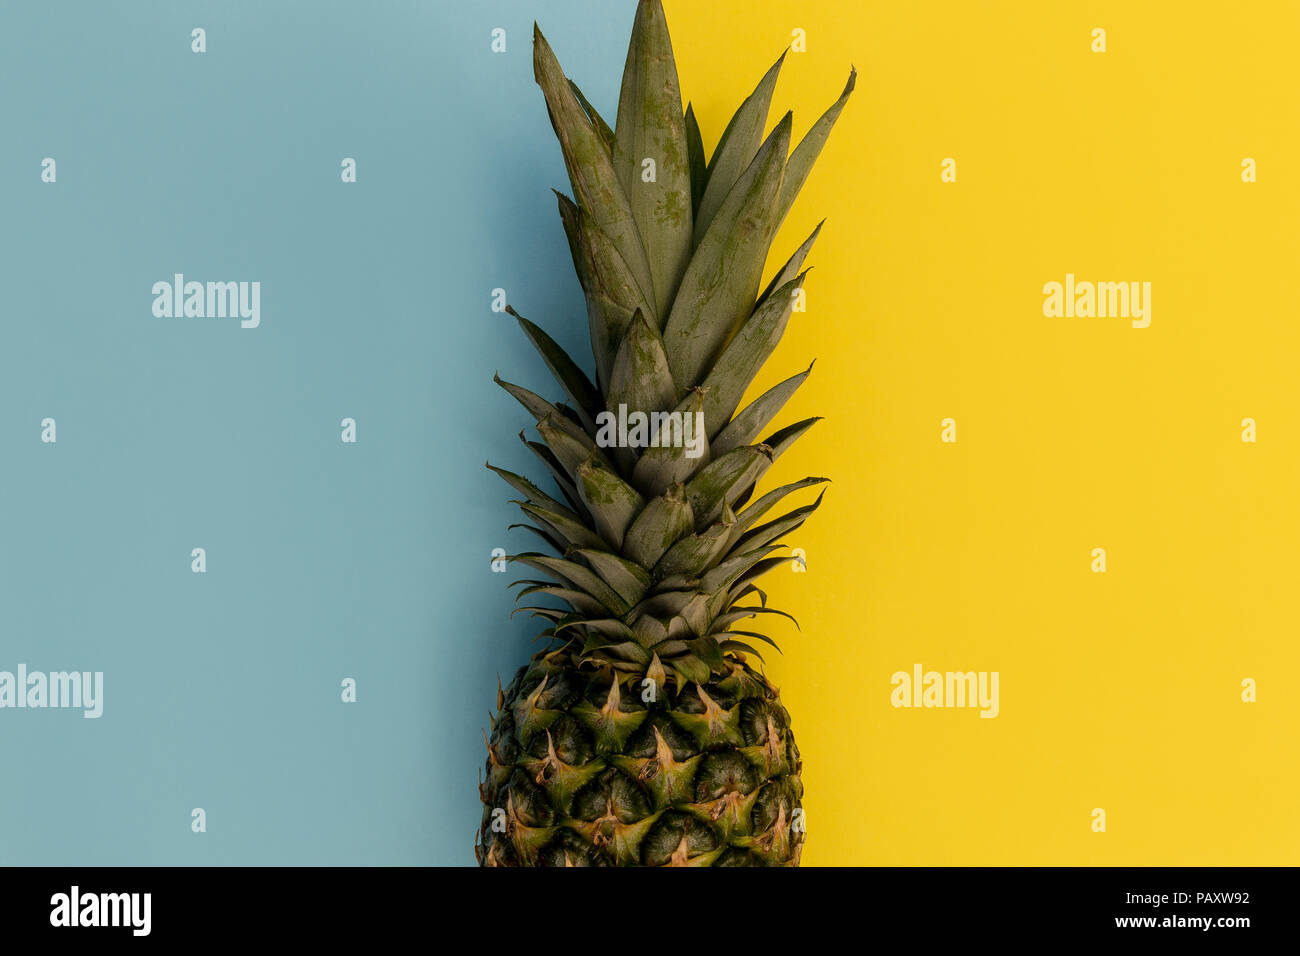 Pineapple fruit on bright yellow background minimal summer food concept Stock Photo